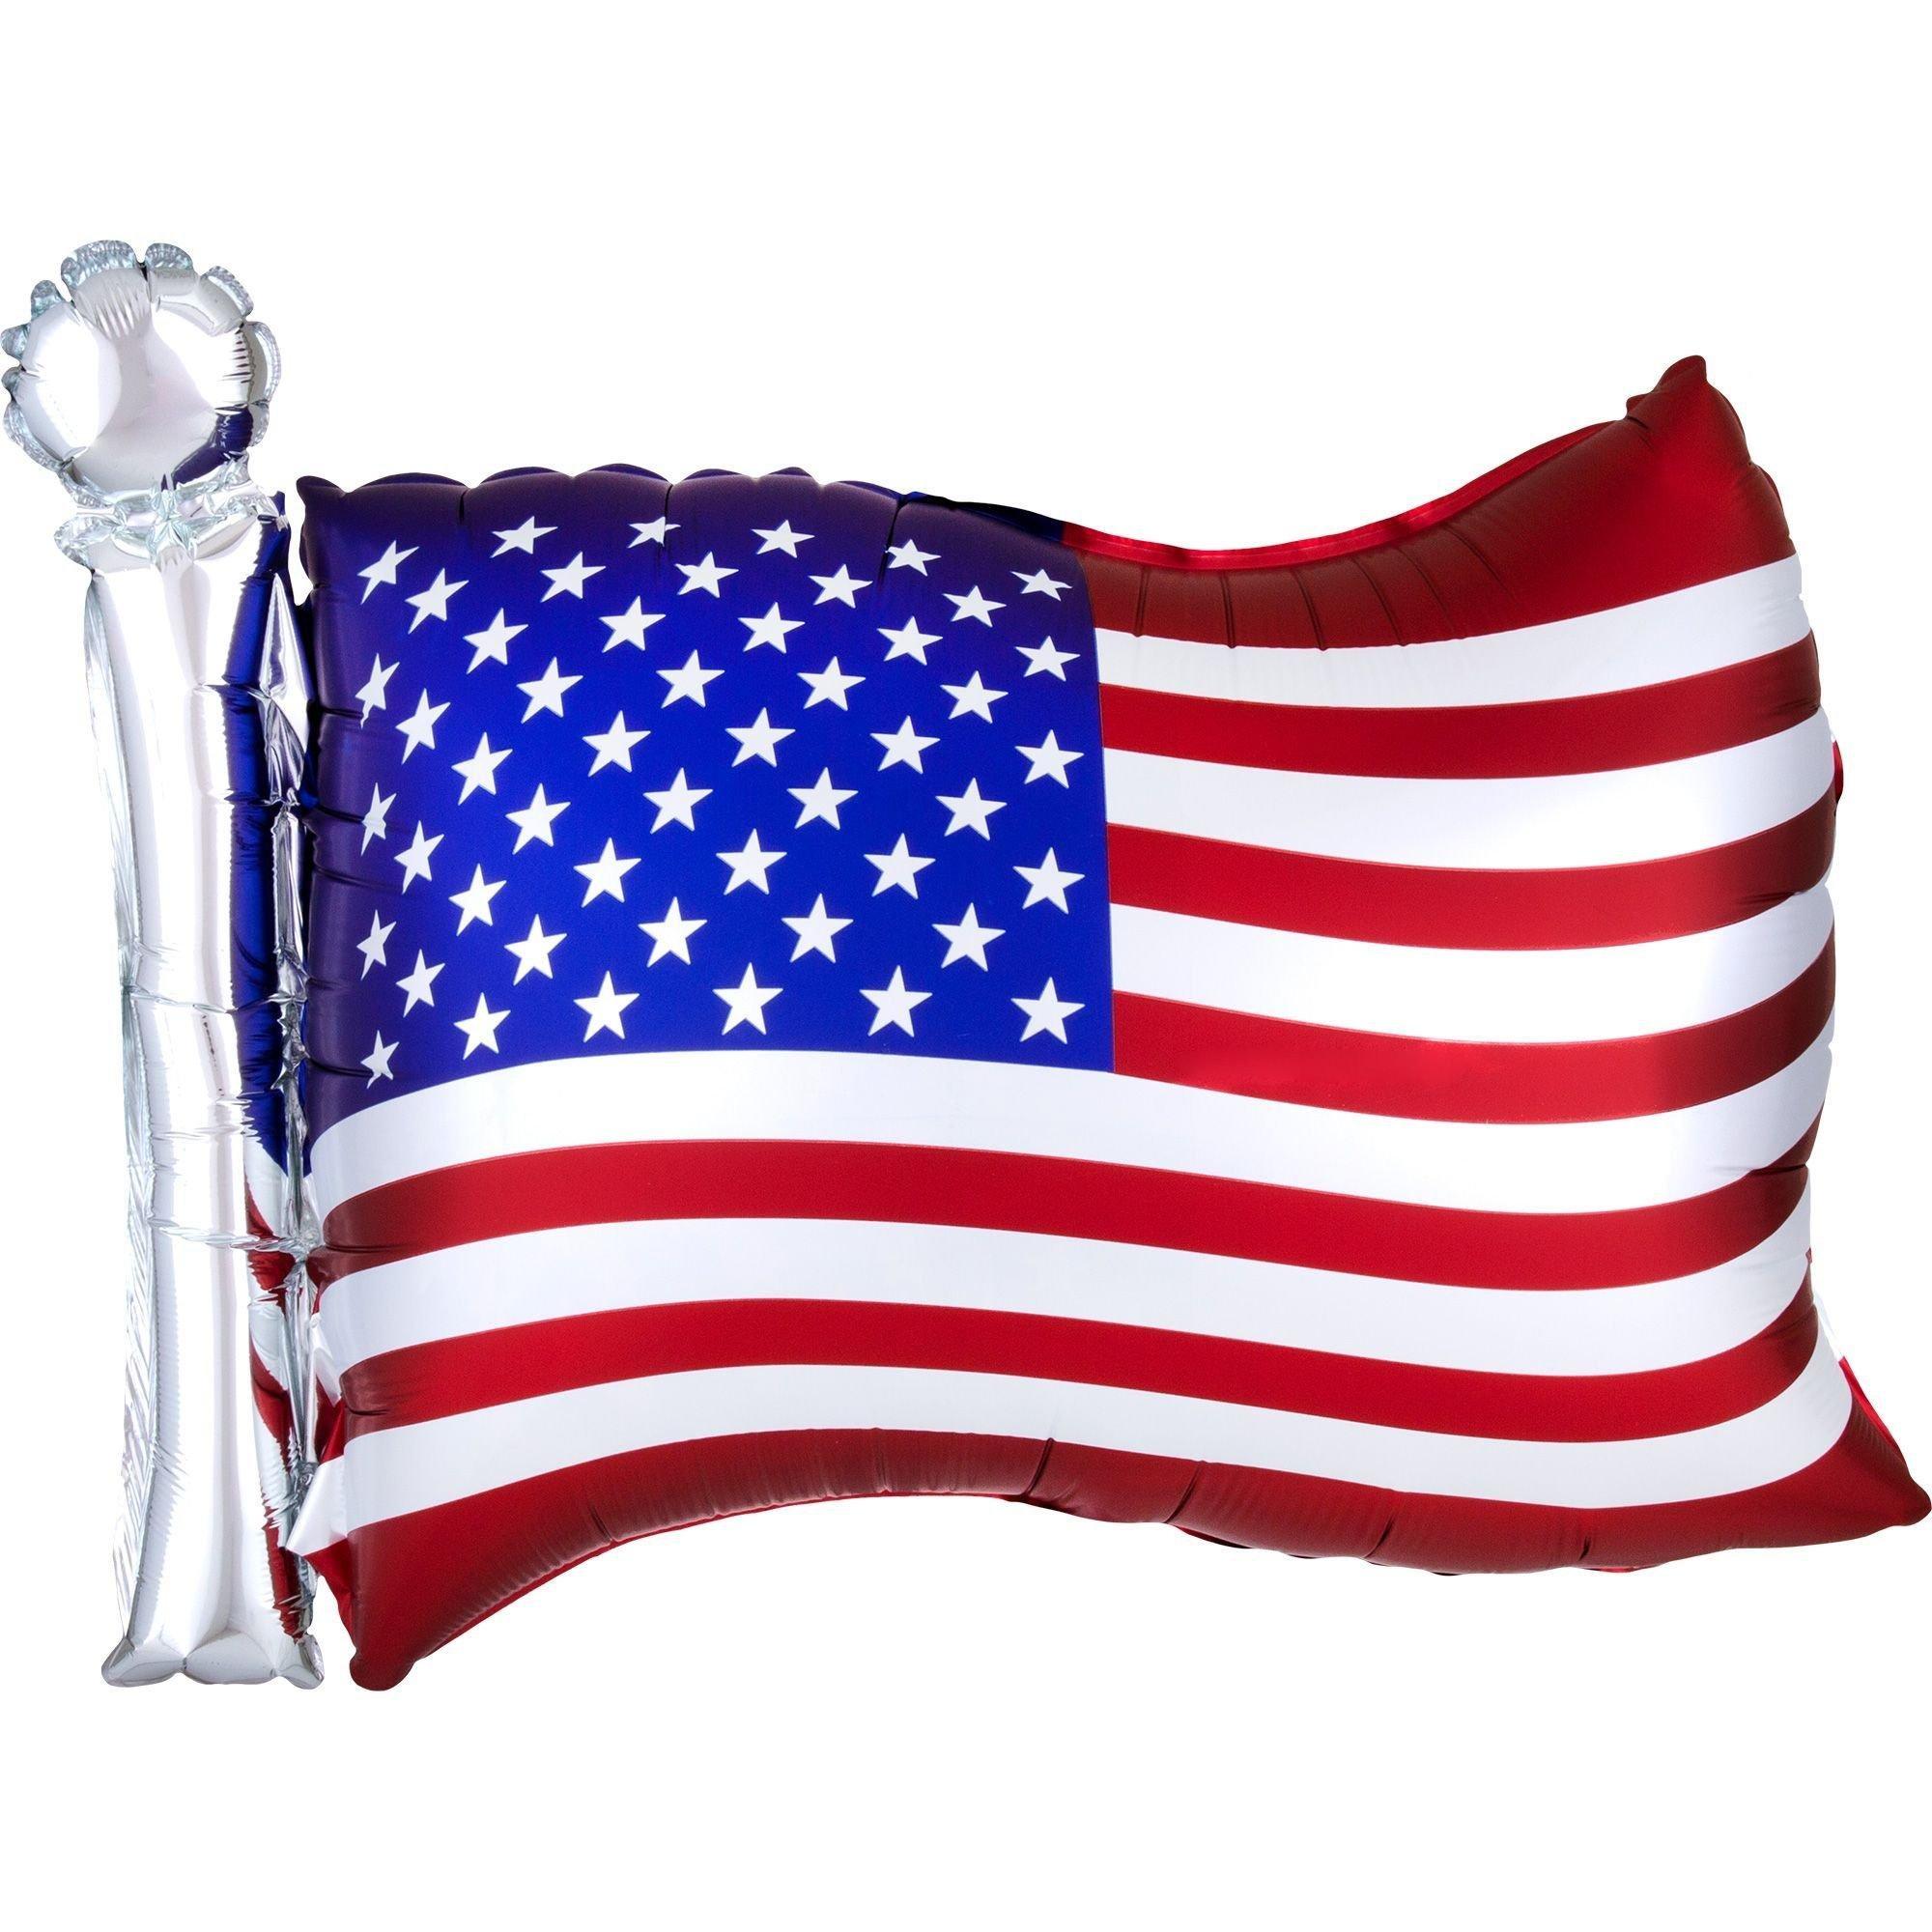 Premium Patriotic Foil Balloon Bouquet with Balloon Weight, 13pc